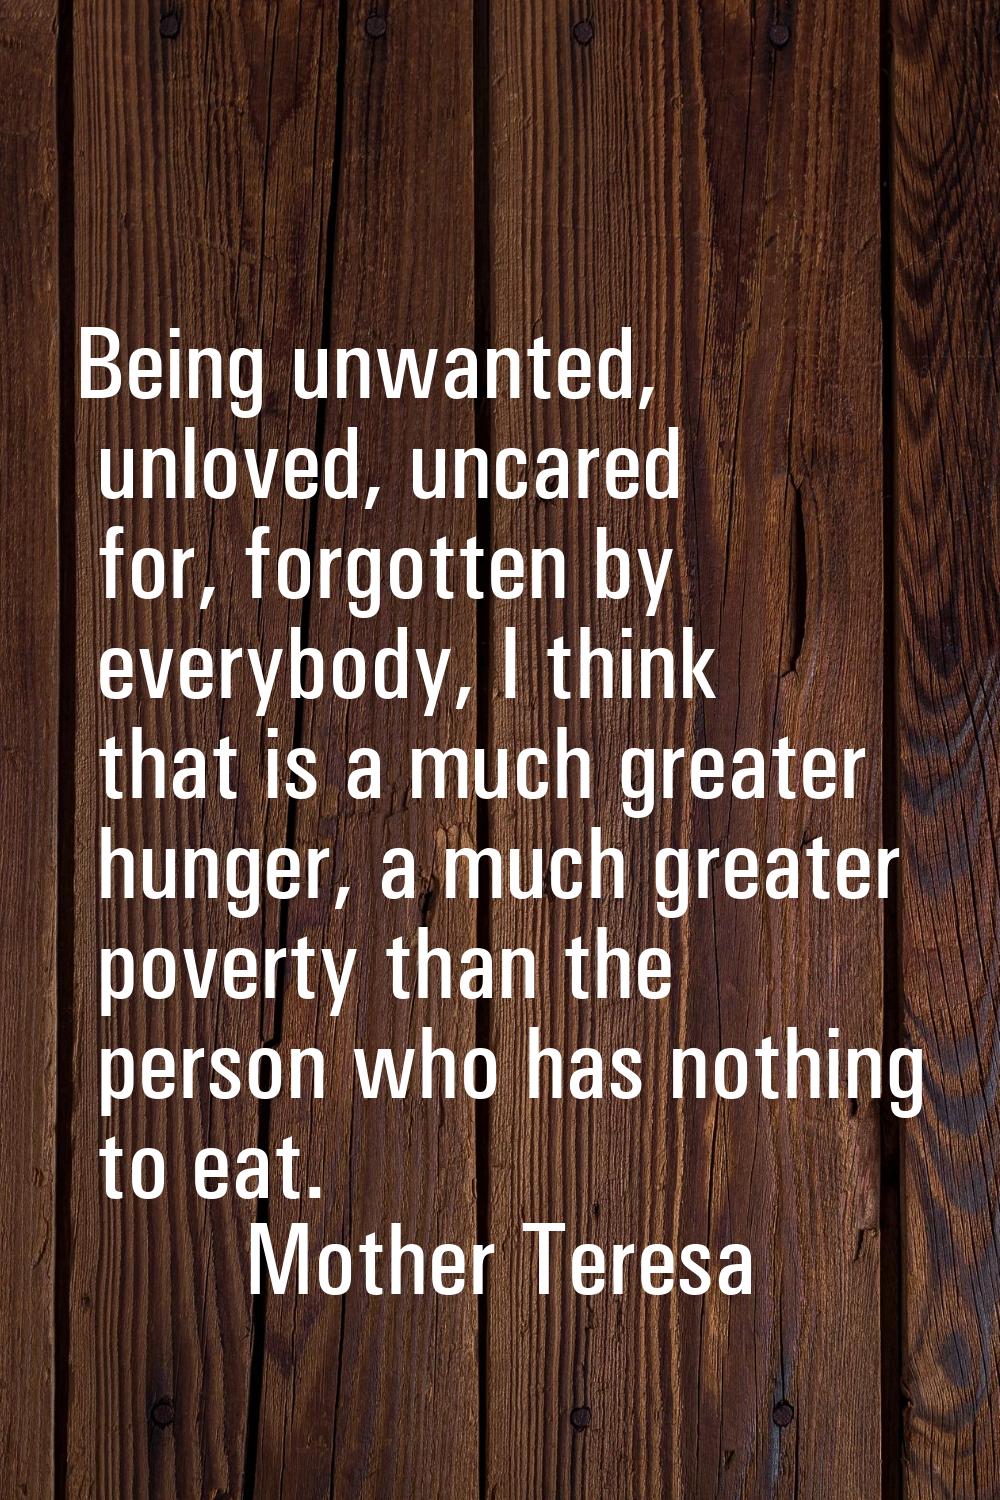 Being unwanted, unloved, uncared for, forgotten by everybody, I think that is a much greater hunger